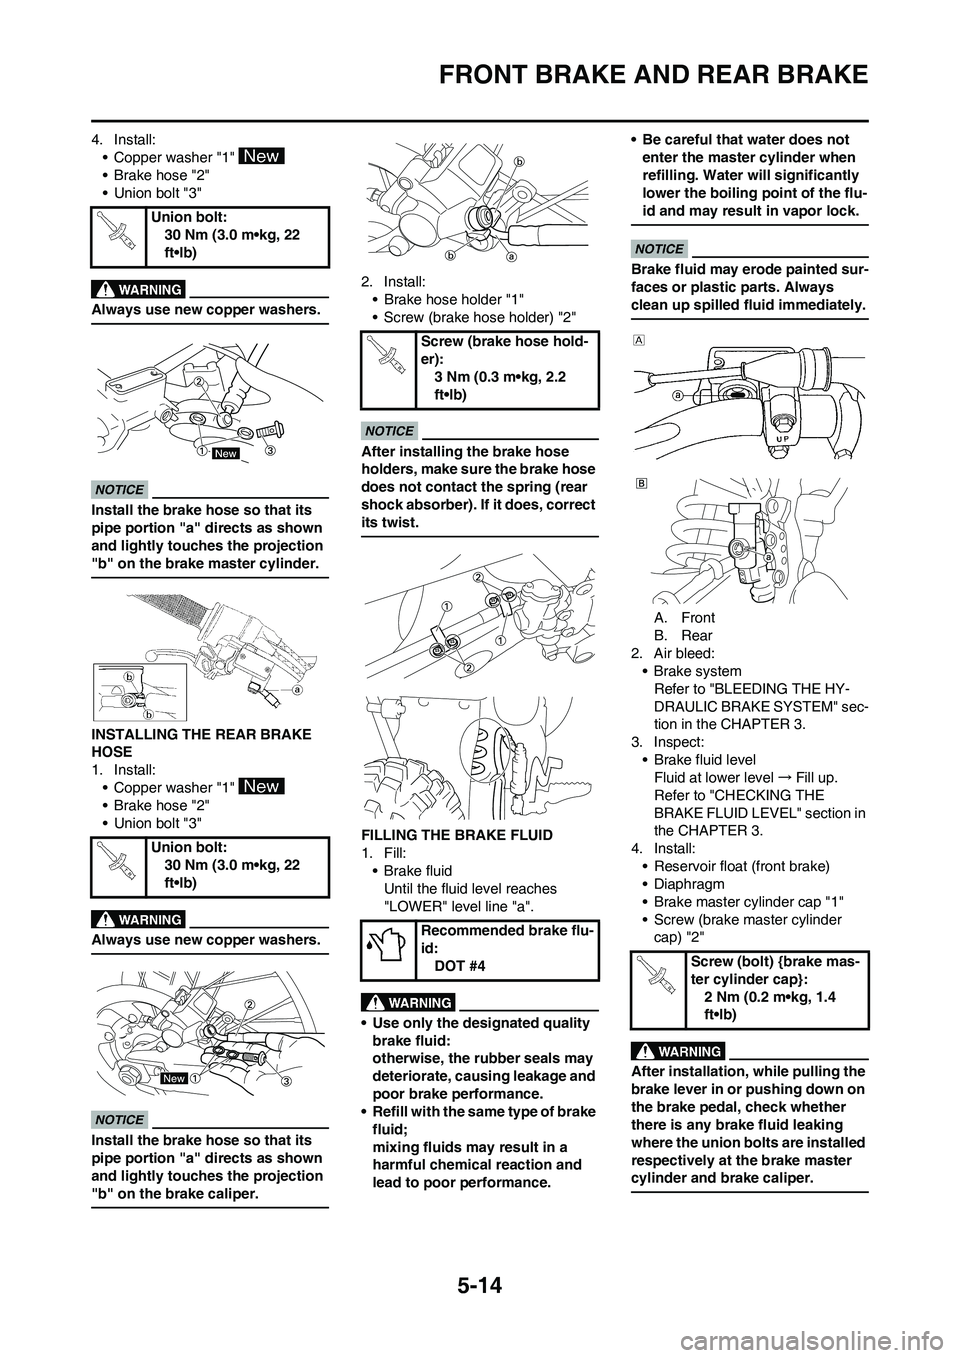 YAMAHA YZ450F 2009  Owners Manual 5-14
FRONT BRAKE AND REAR BRAKE
4. Install:
• Copper washer "1" 
•Brake hose "2"
• Union bolt "3"
Always use new copper washers.
Install the brake hose so that its 
pipe portion "a" directs as s